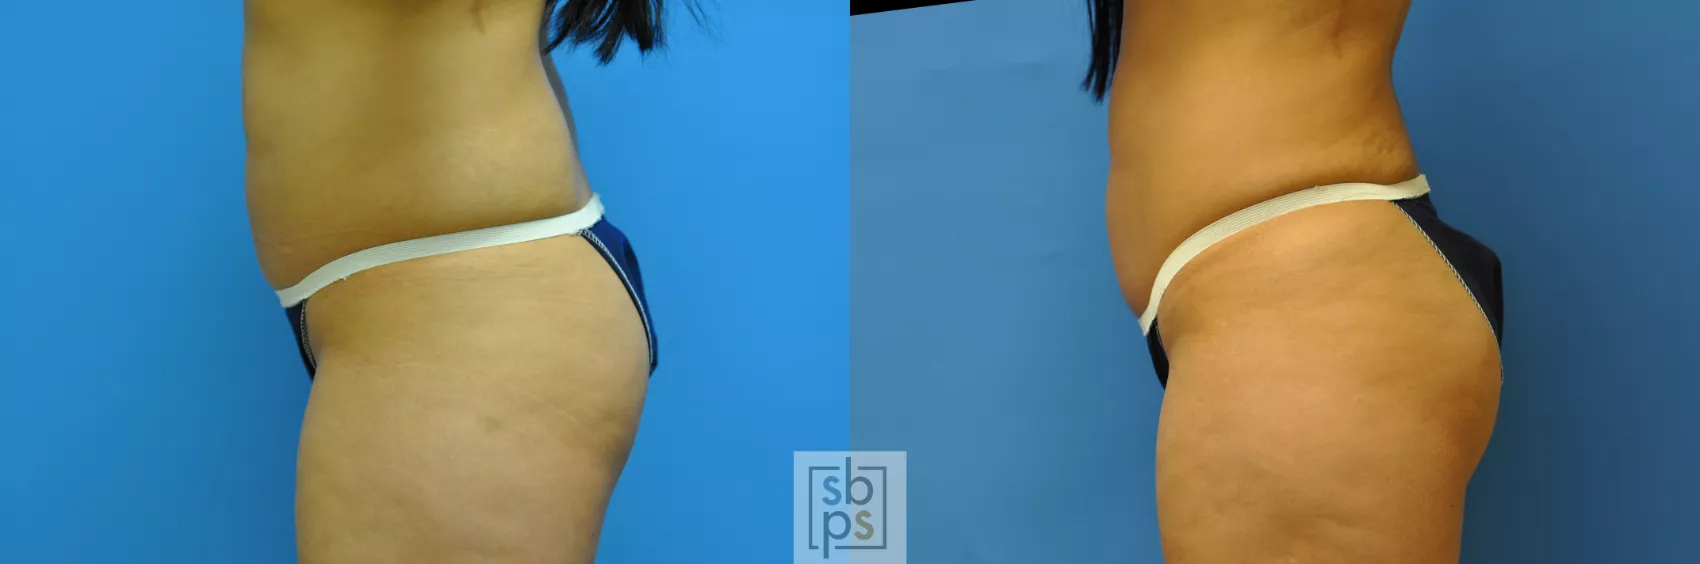 Buttock Enhancement Before and After Photos - SF Plastic Surgeon